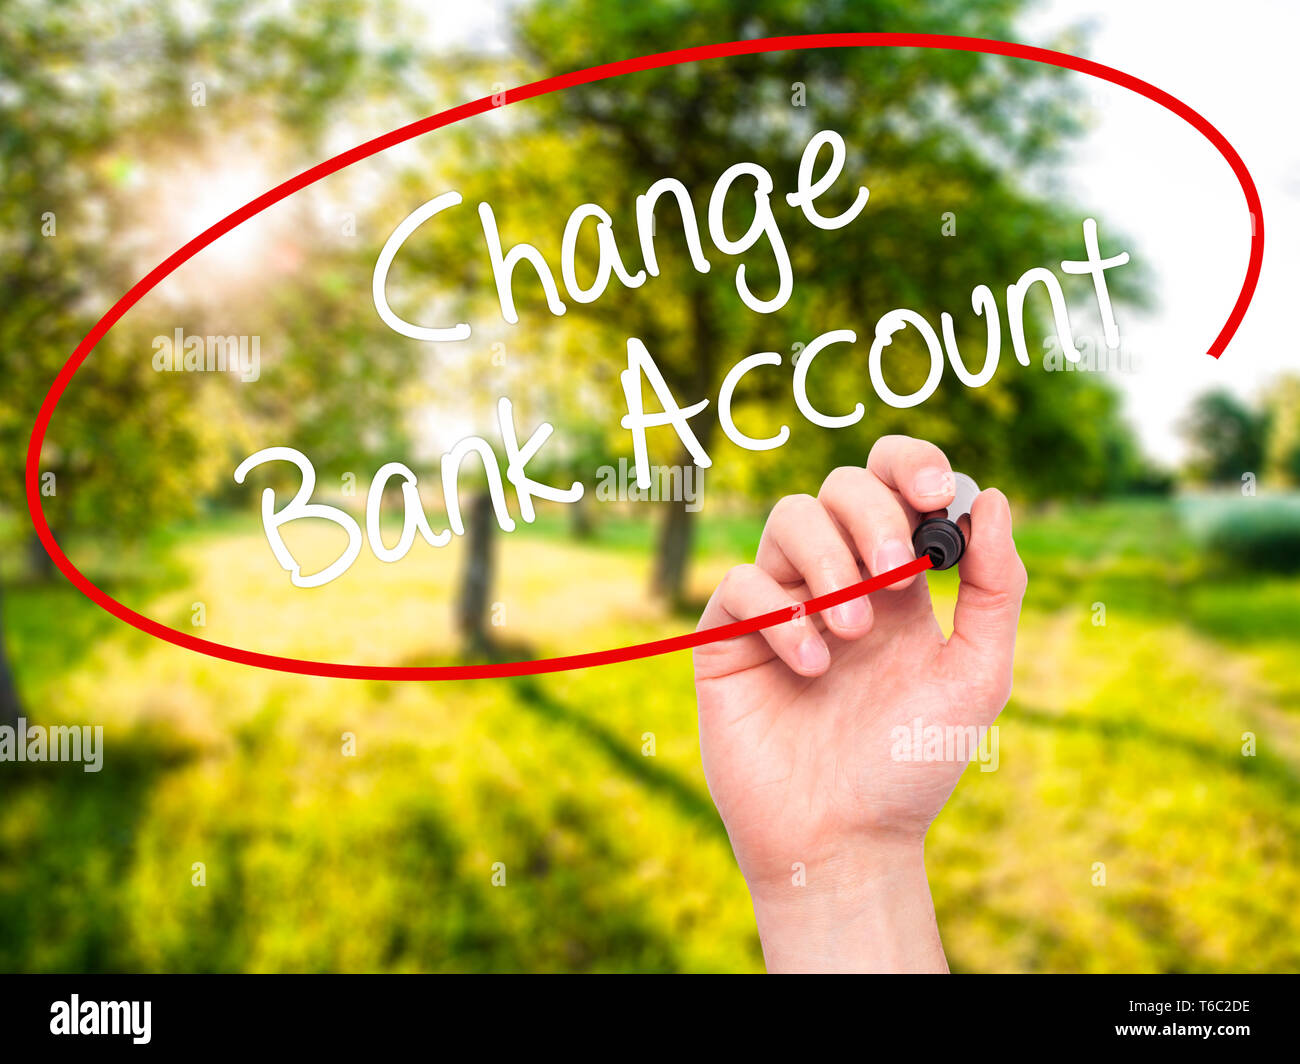 Man Hand writing Change Bank Account with black marker on visual screen Stock Photo